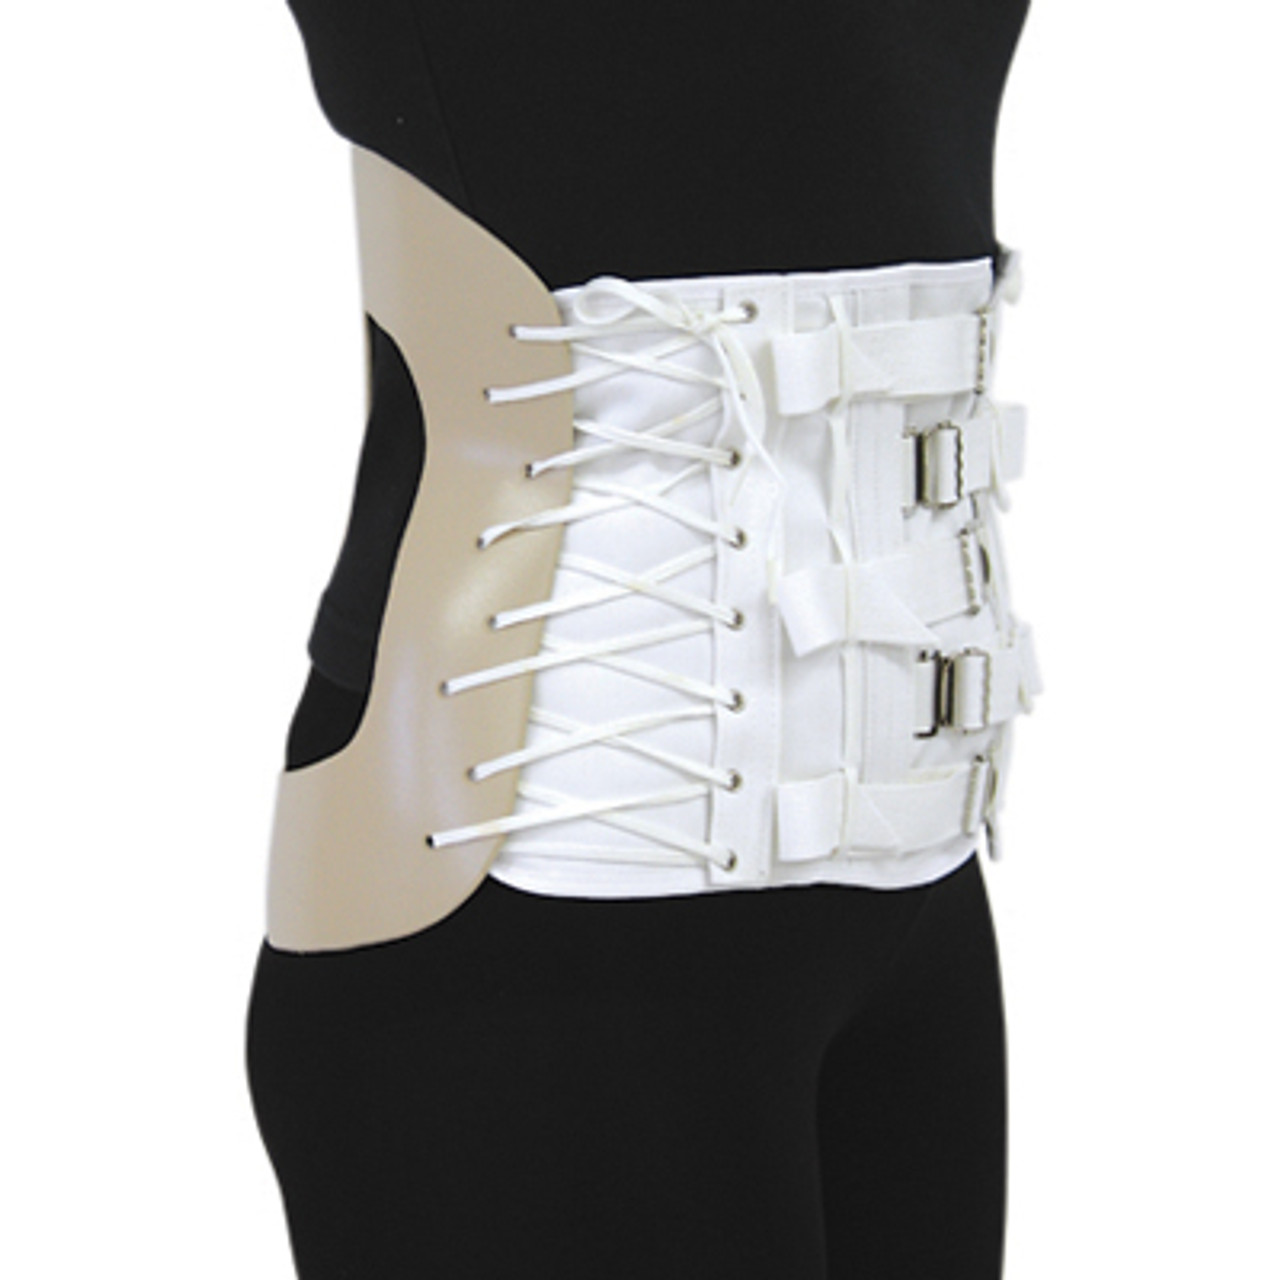 Harris 0944 Corset Fronts 10¼" - 11" for Ladies' - 6 alternating buckles, 10 eyelets, for 0951-Q S-M-ML-L-XL (0944)